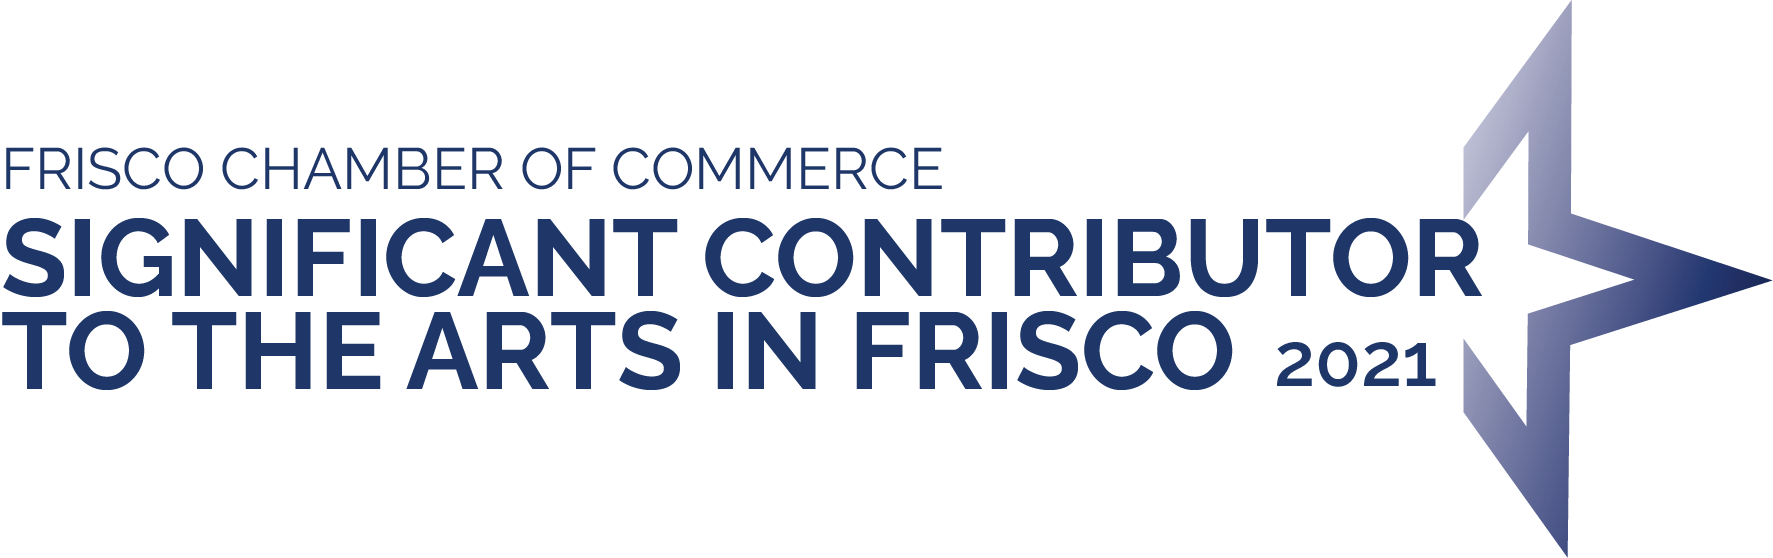 Frisco Chamber of Commerce Significant Contributor to the Arts 2021 logo